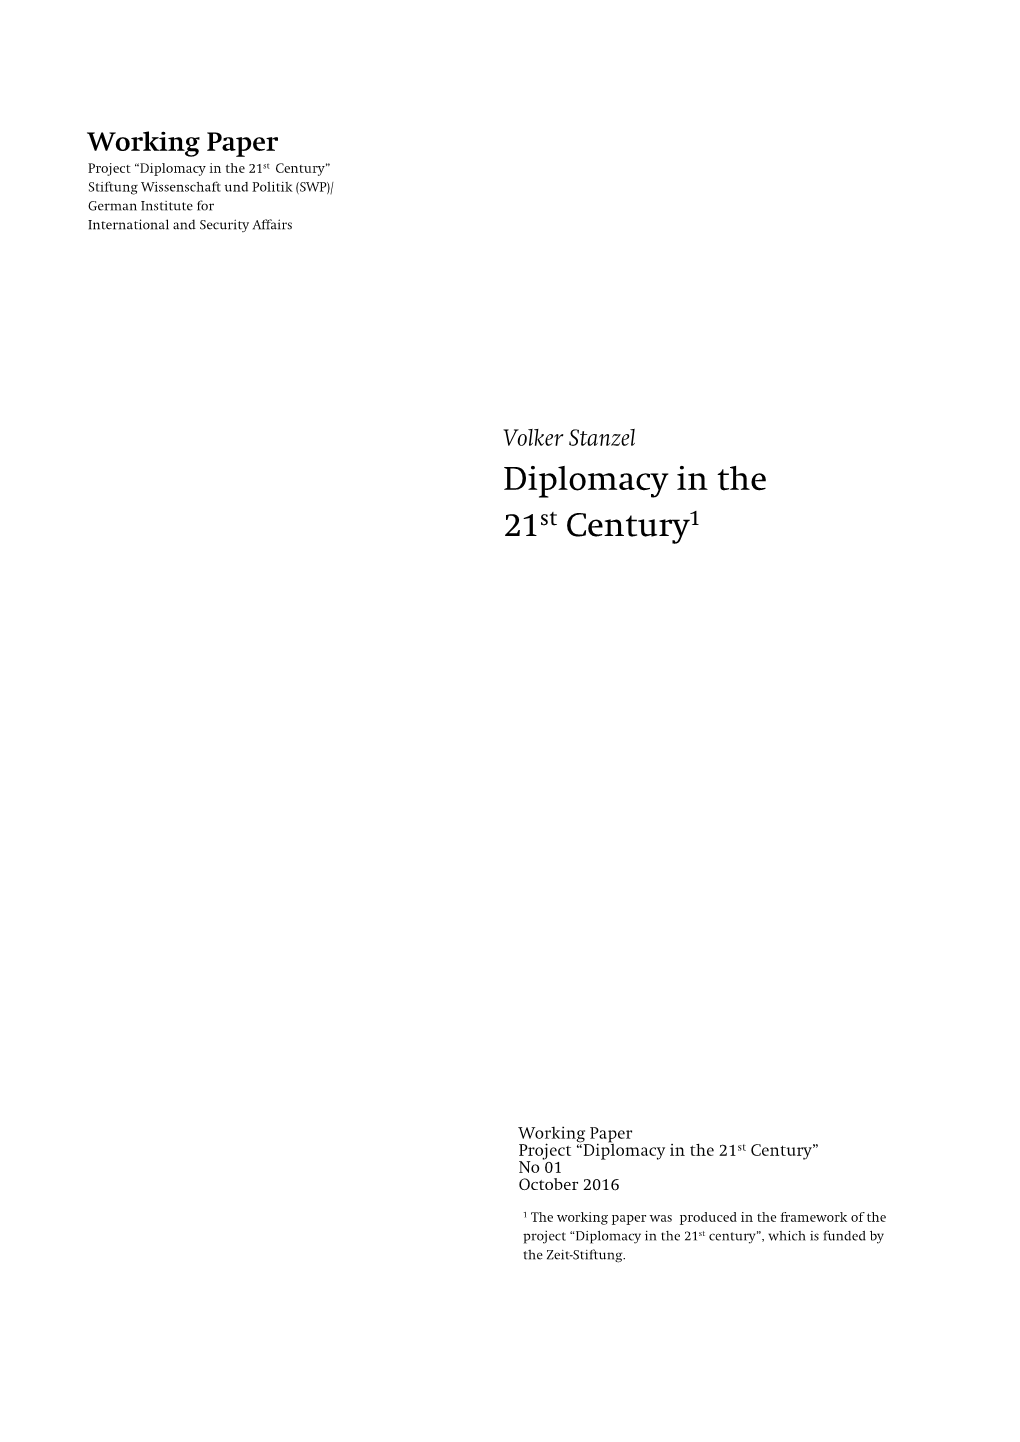 Diplomacy in the 21St Century” Stiftung Wissenschaft Und Politik (SWP)/ German Institute for International and Security Affairs